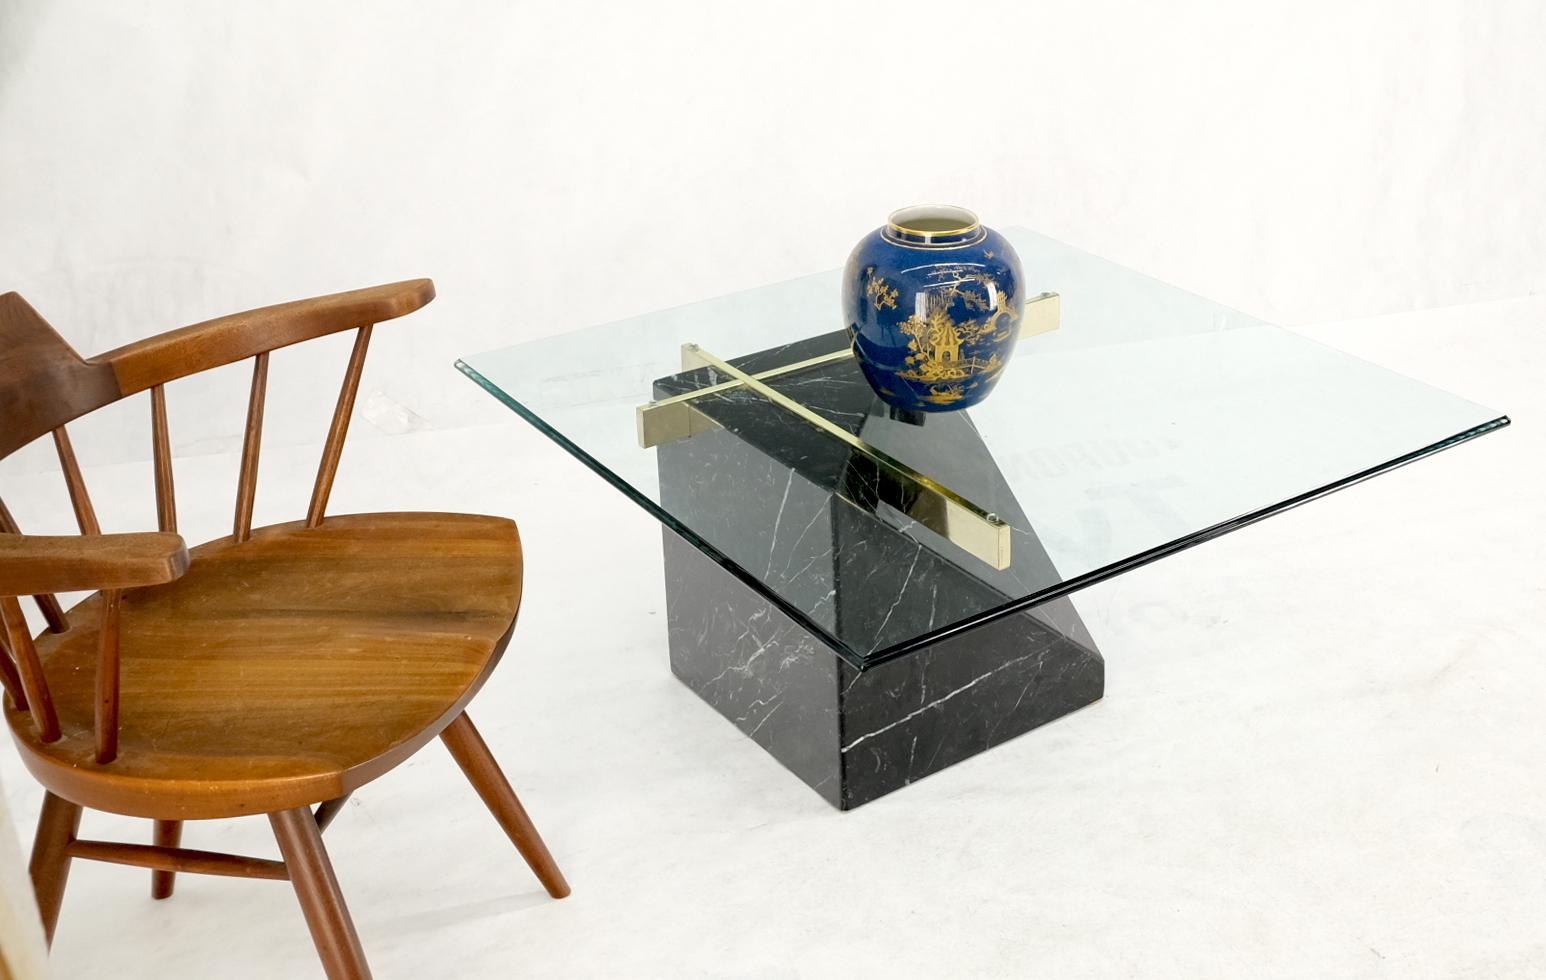 Black cube shape marble base brass stretchers square glass top coffee table.
Cantilever design base Italian coffee table.